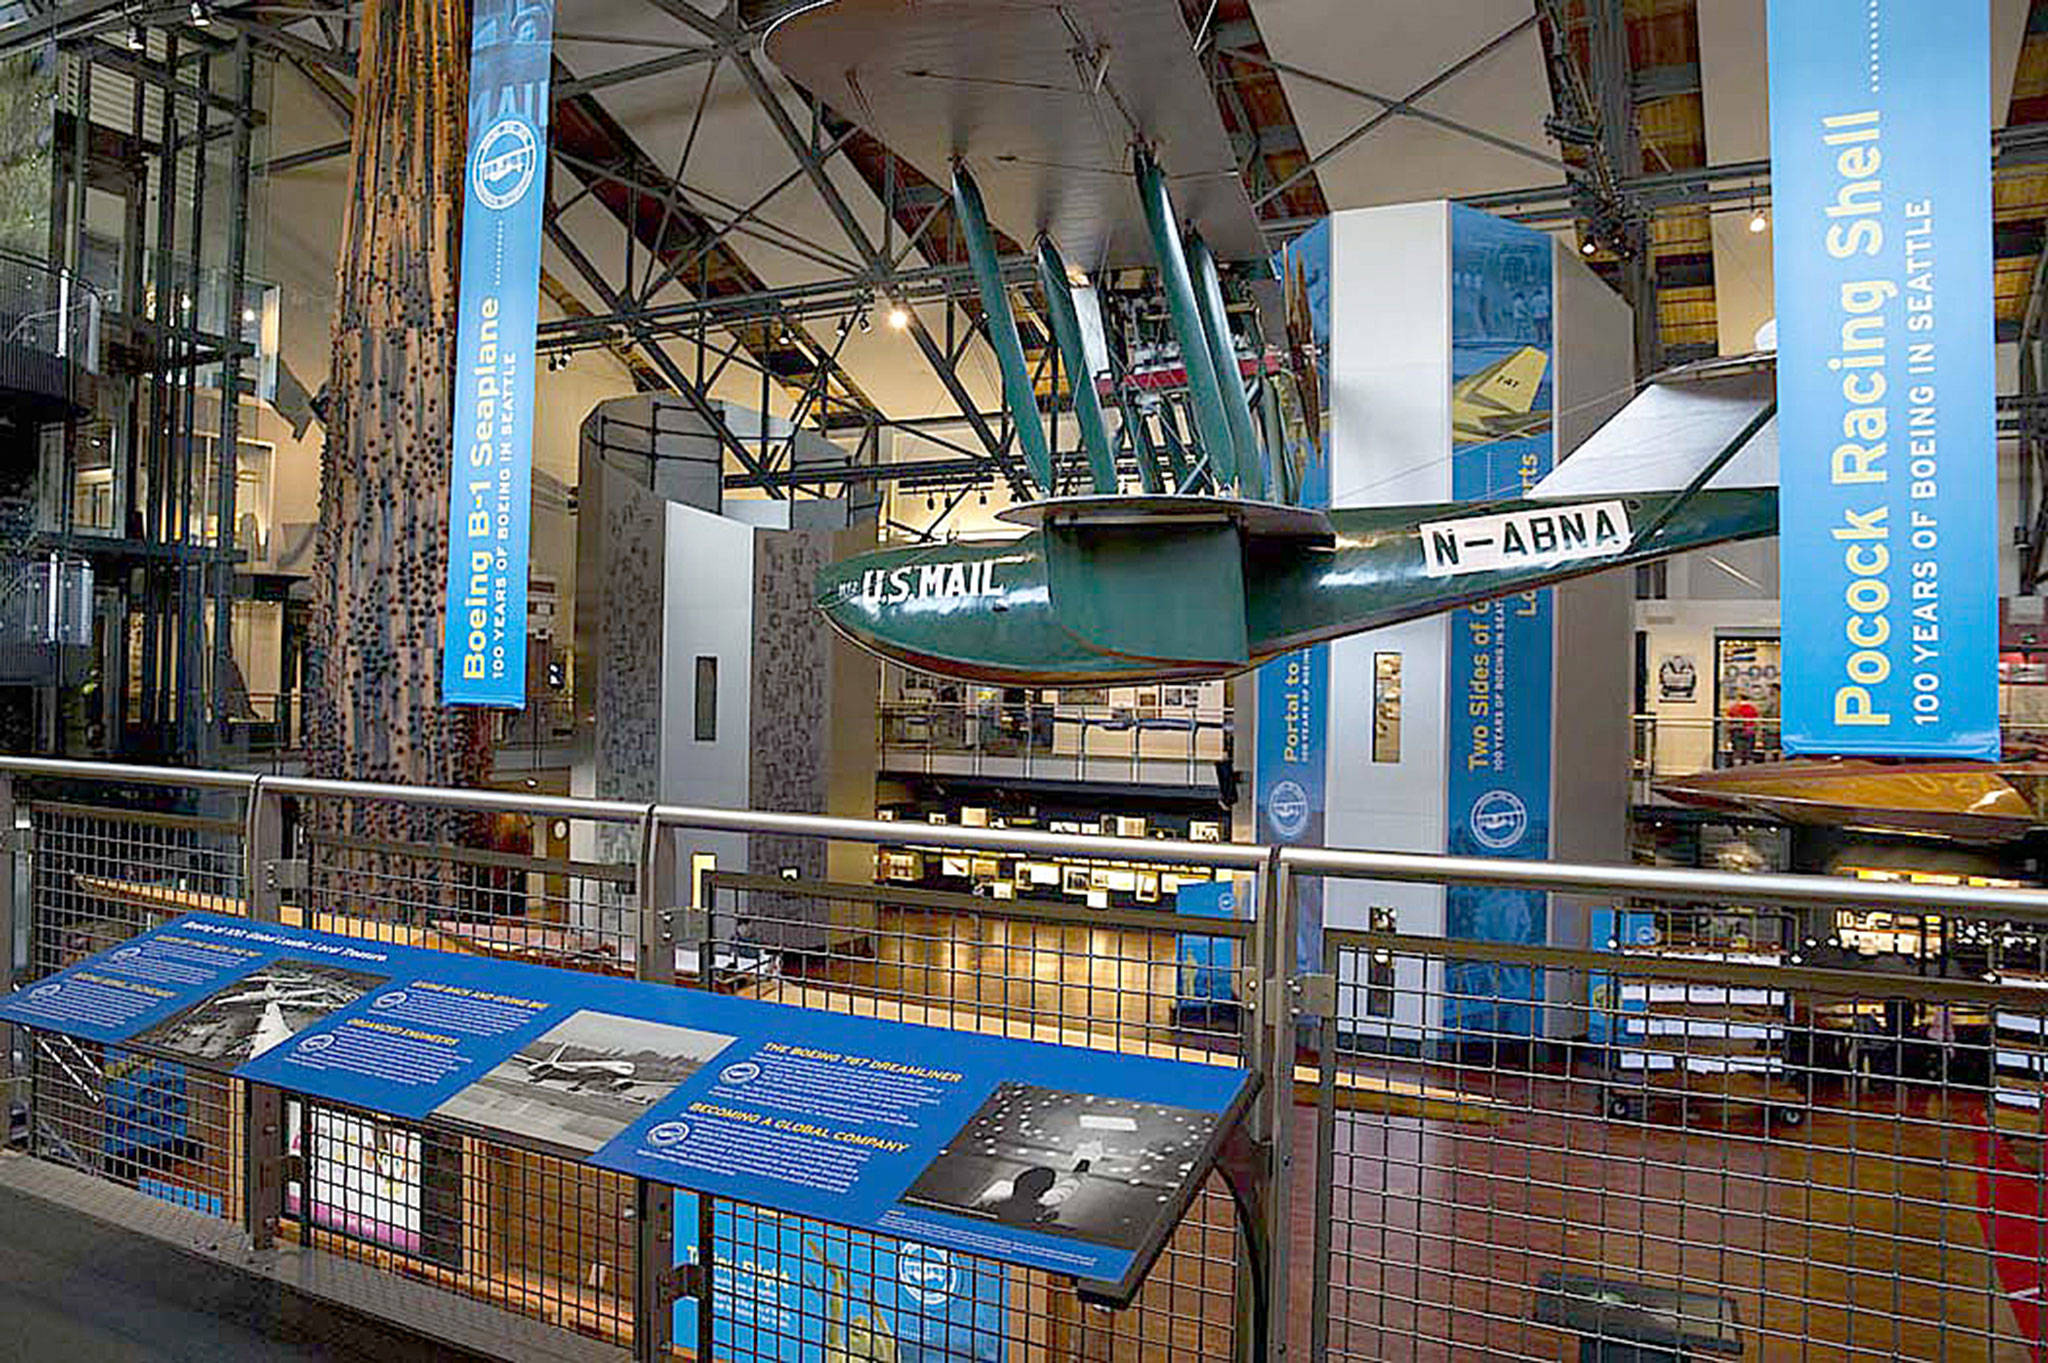 Boeing’s 1st century: Historical faces of Boeing come alive in interactive experience